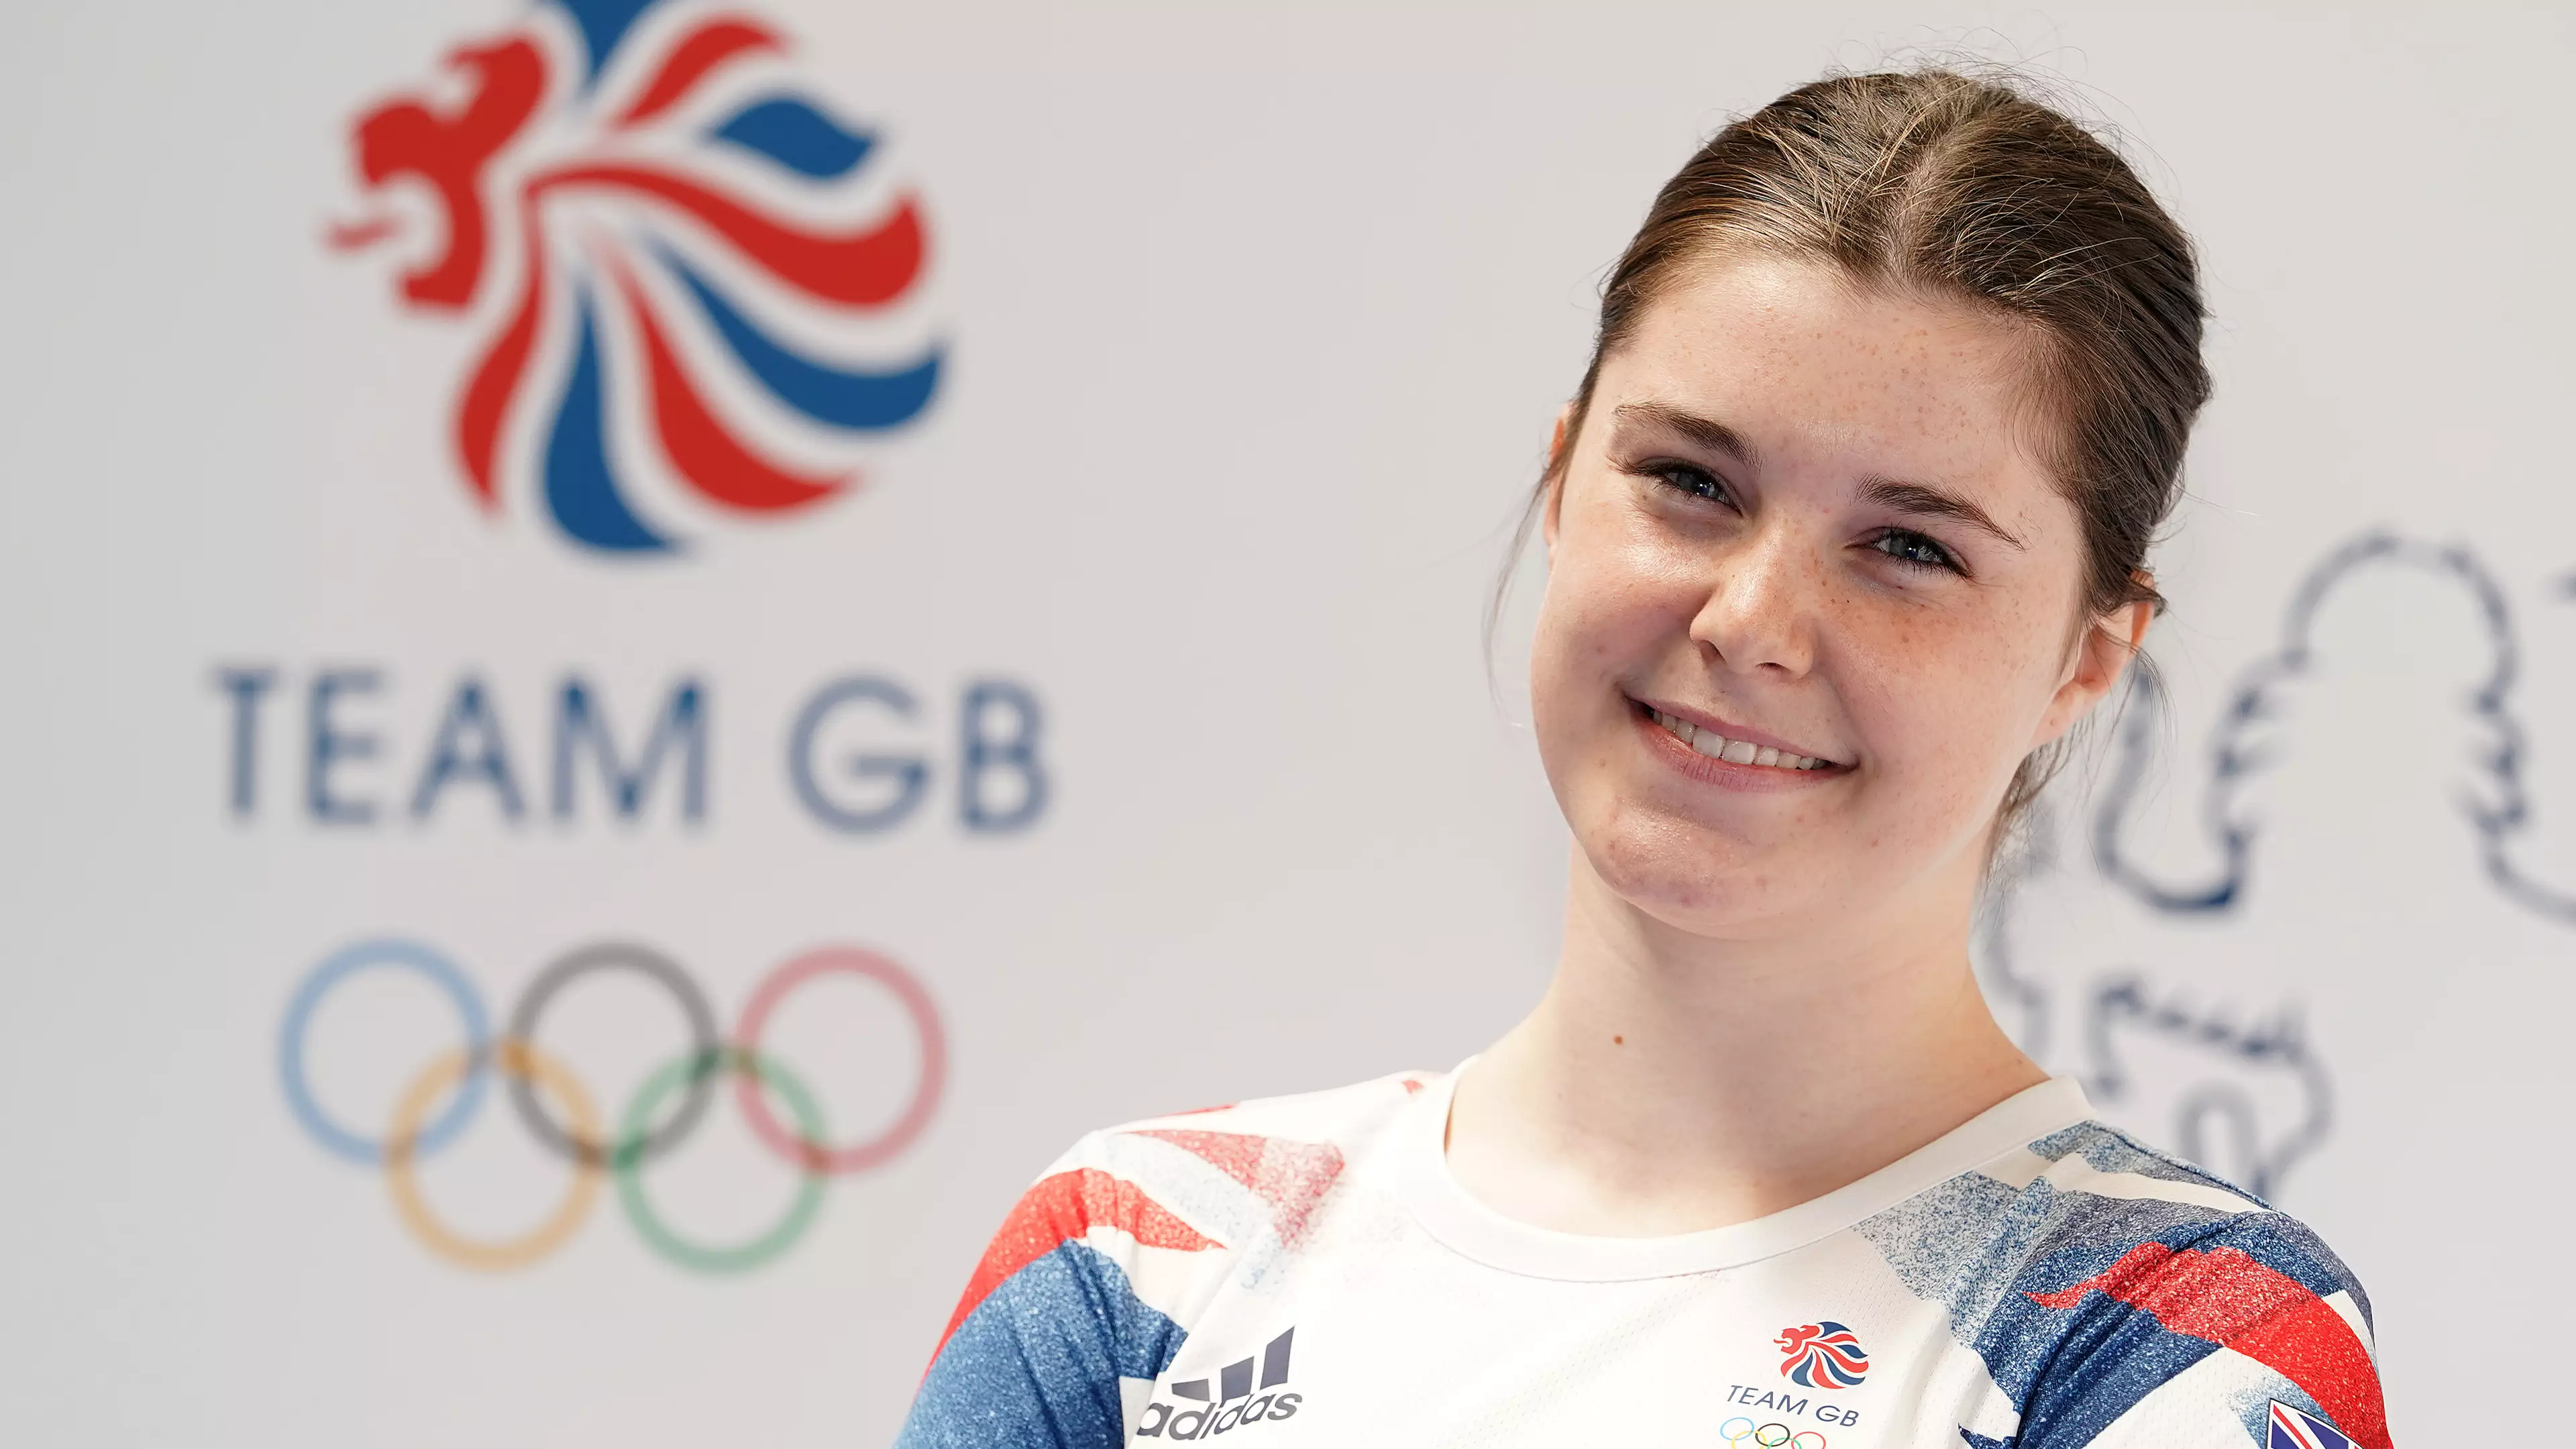 Fred Sirieix 'So Proud' Of Daughter Representing Team GB At Olympics